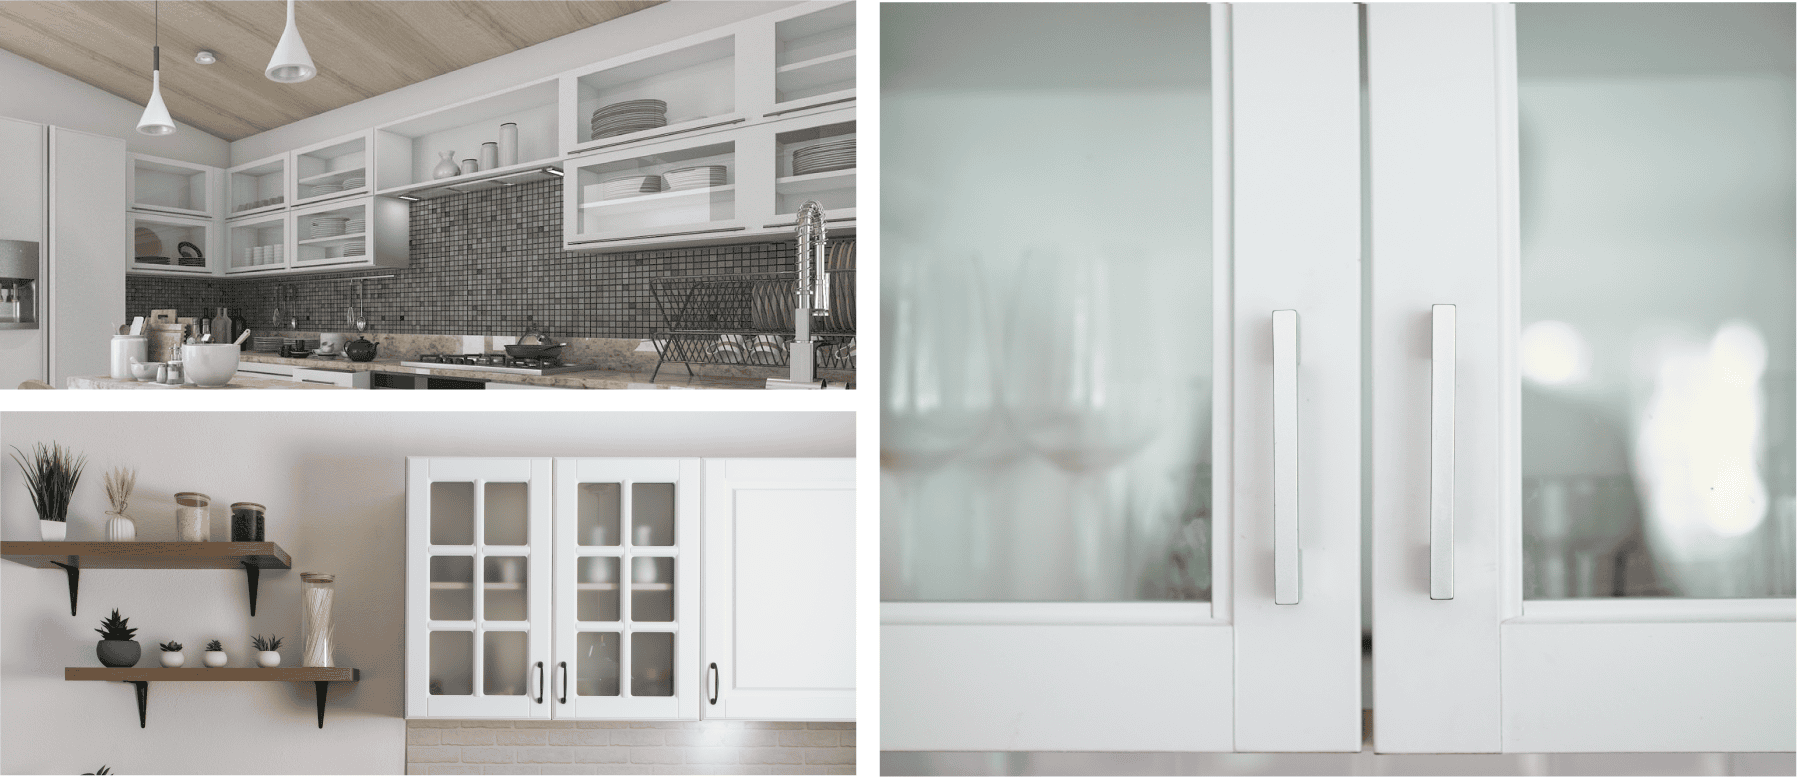 Three kitchen cabinet designs with glass doors for modern homes.